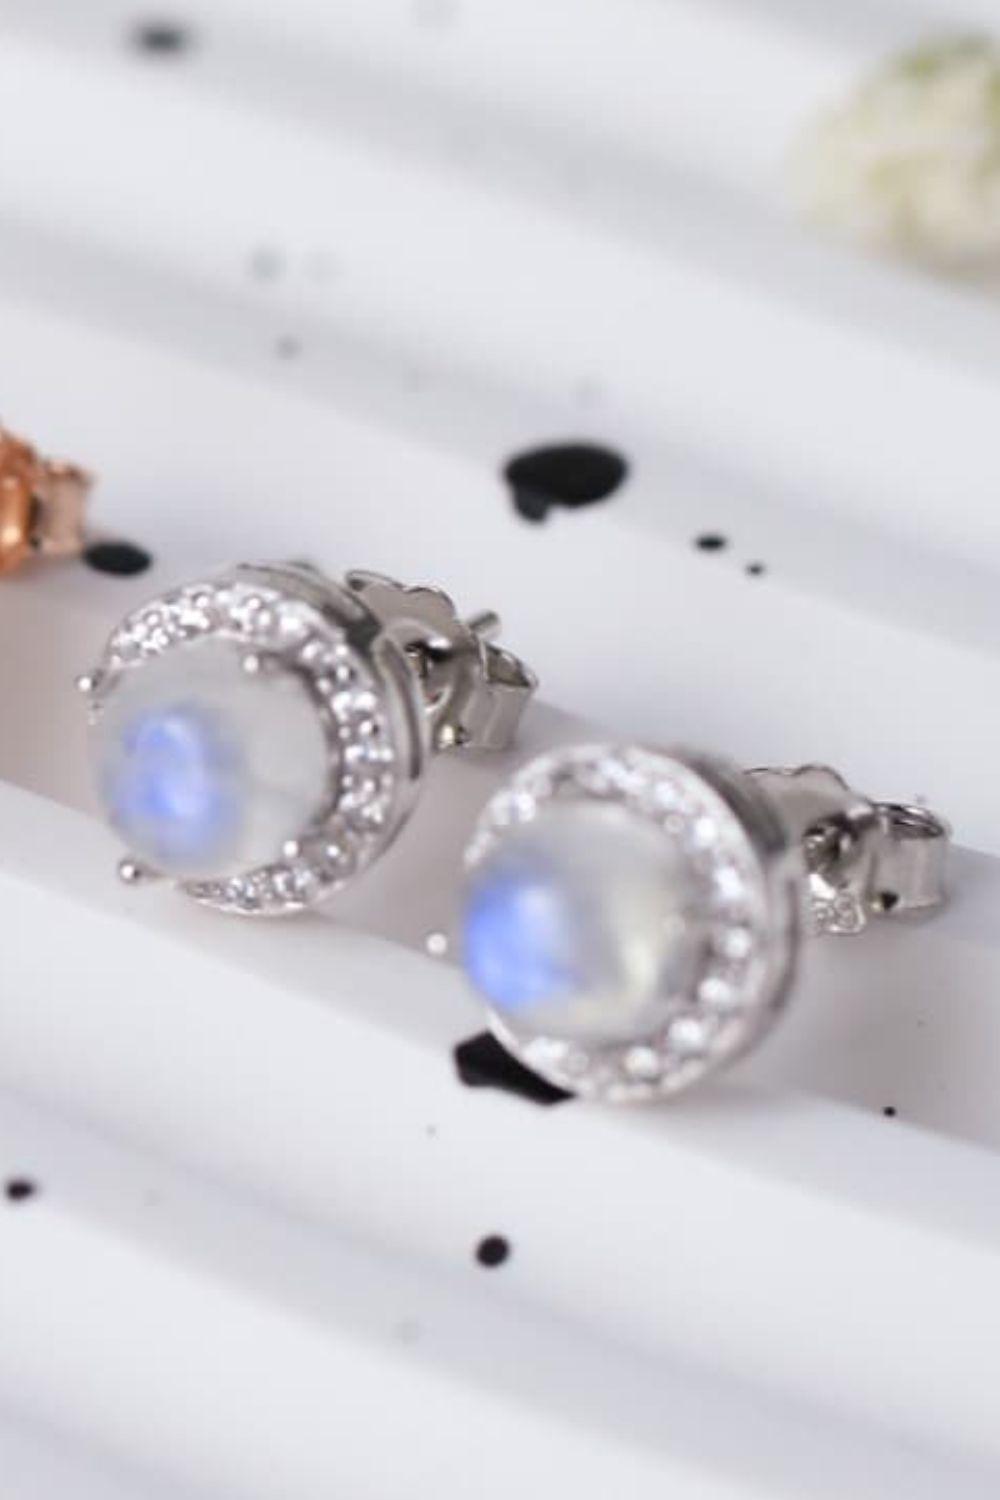 High Quality Natural Moonstone 925 Sterling Silver Stud Earrings BLUE ZONE PLANET